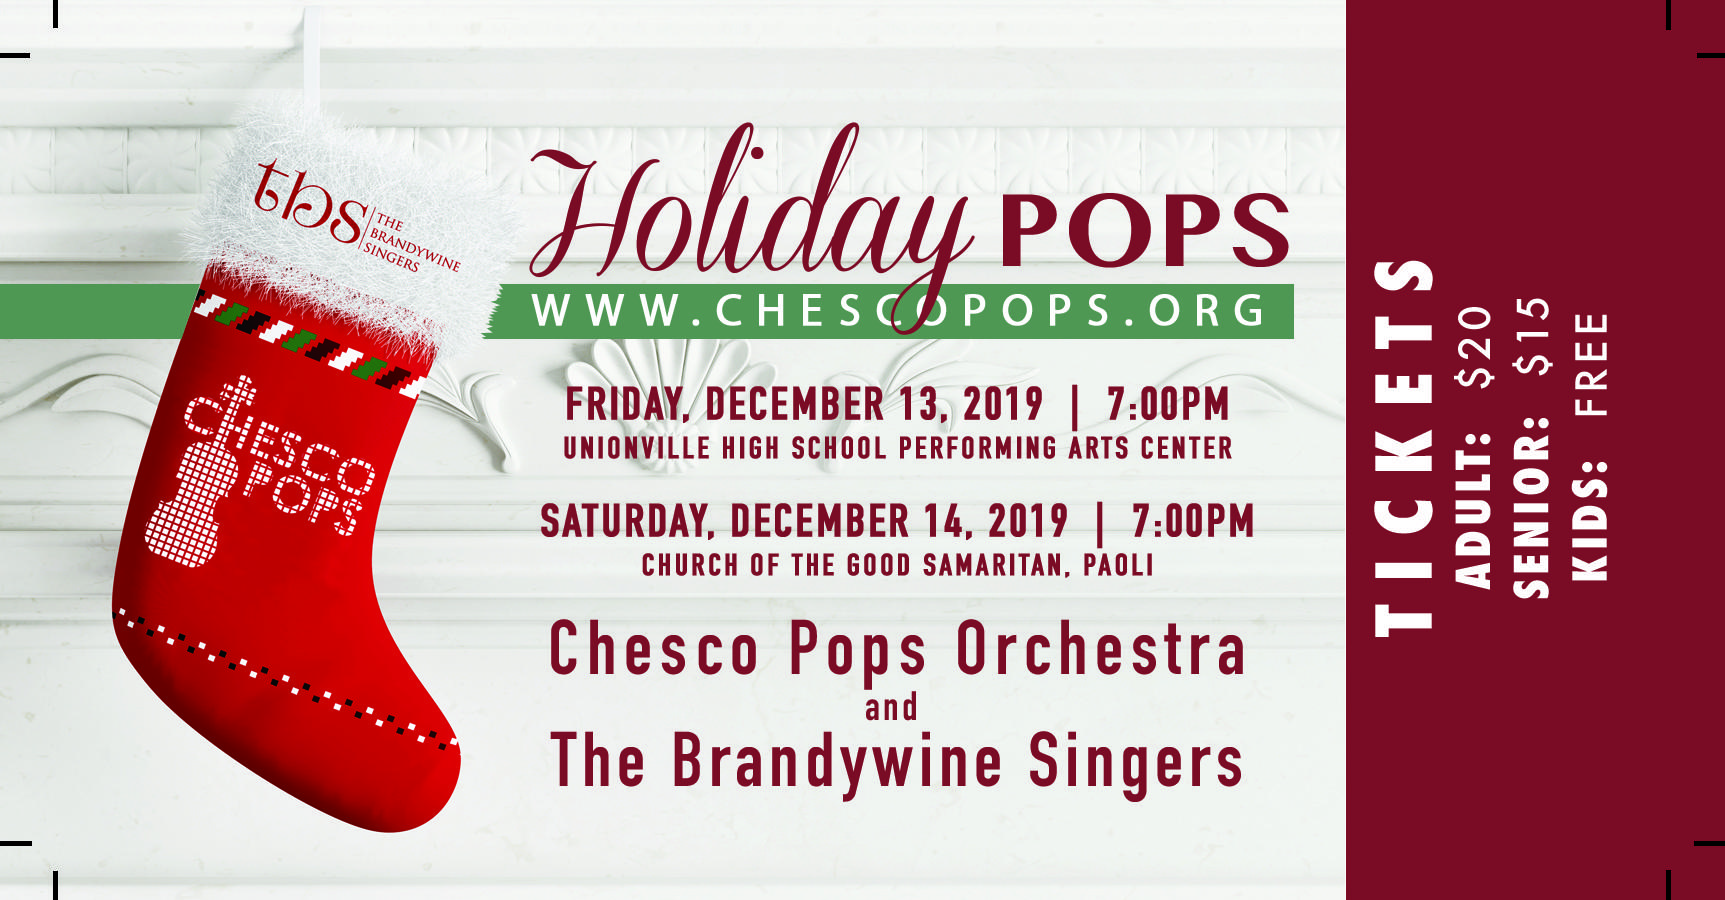 Holiday Pops Concert with Chesco Pops Orchestra and the Brandywine Singers